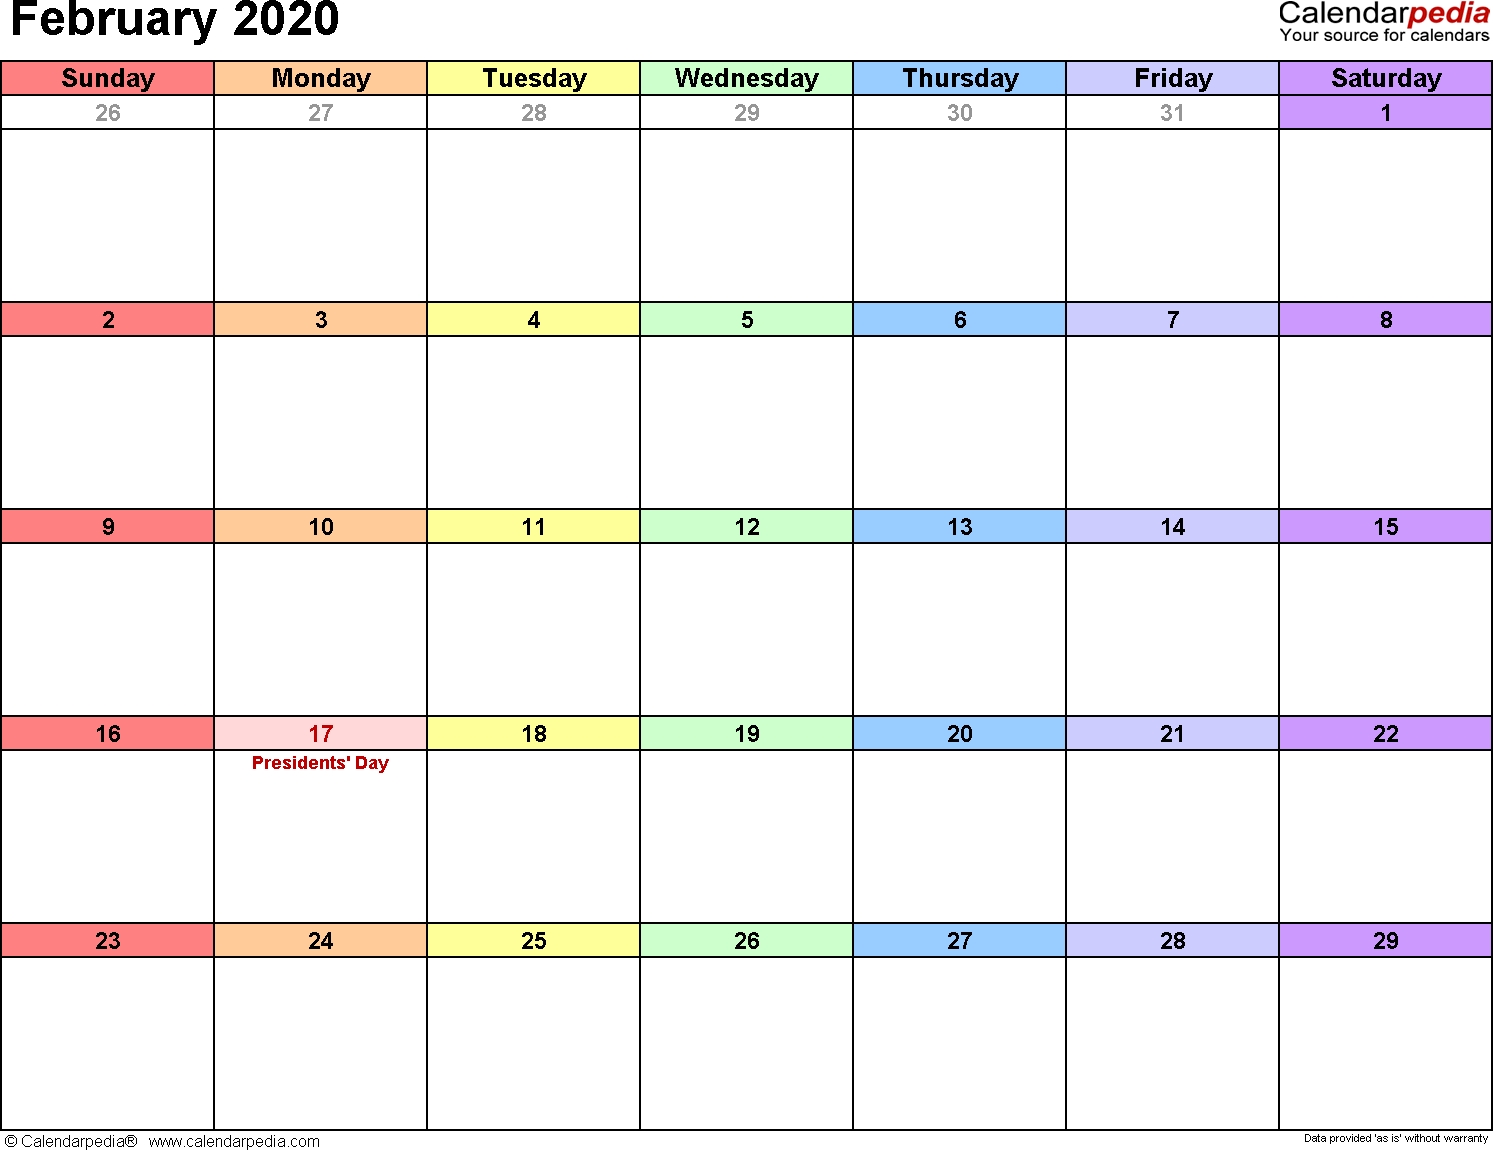 February 2020 Calendars For Word, Excel &amp; Pdf Remarkable 2020 Calendar February Month